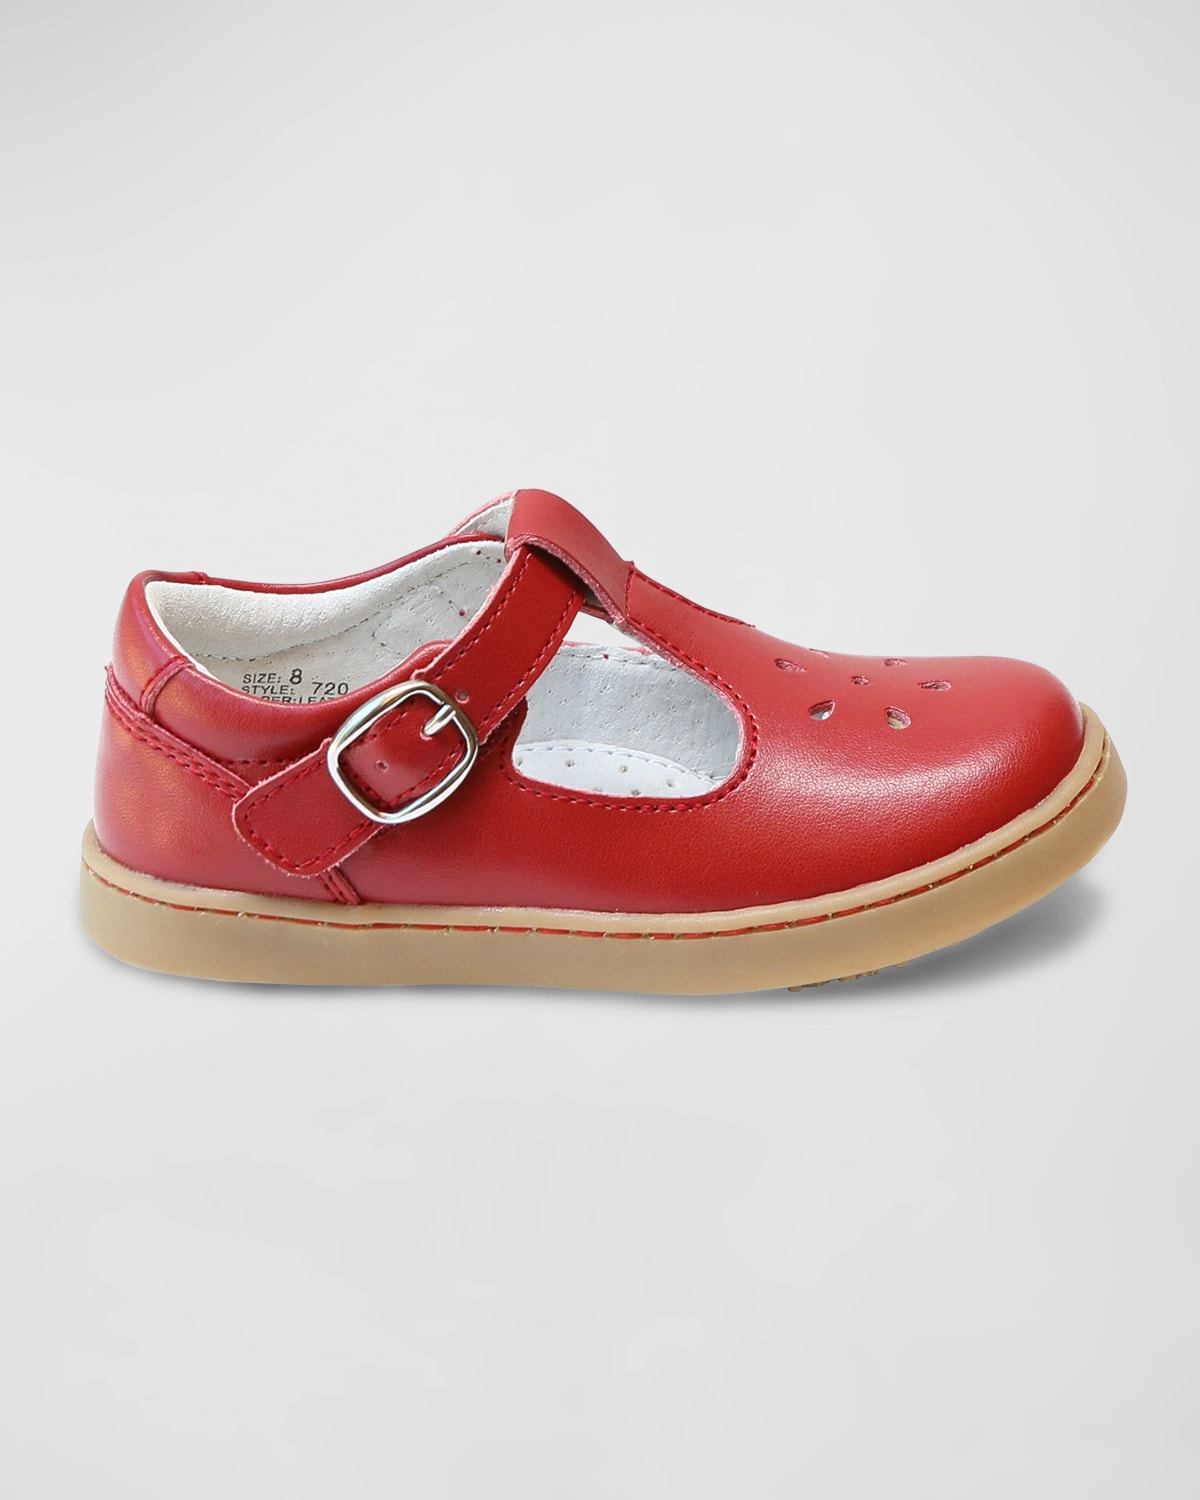 L'amour Shoes Girl's Chelsea T-strap Mary Jane Shoes, Baby/toddler/kids In Red